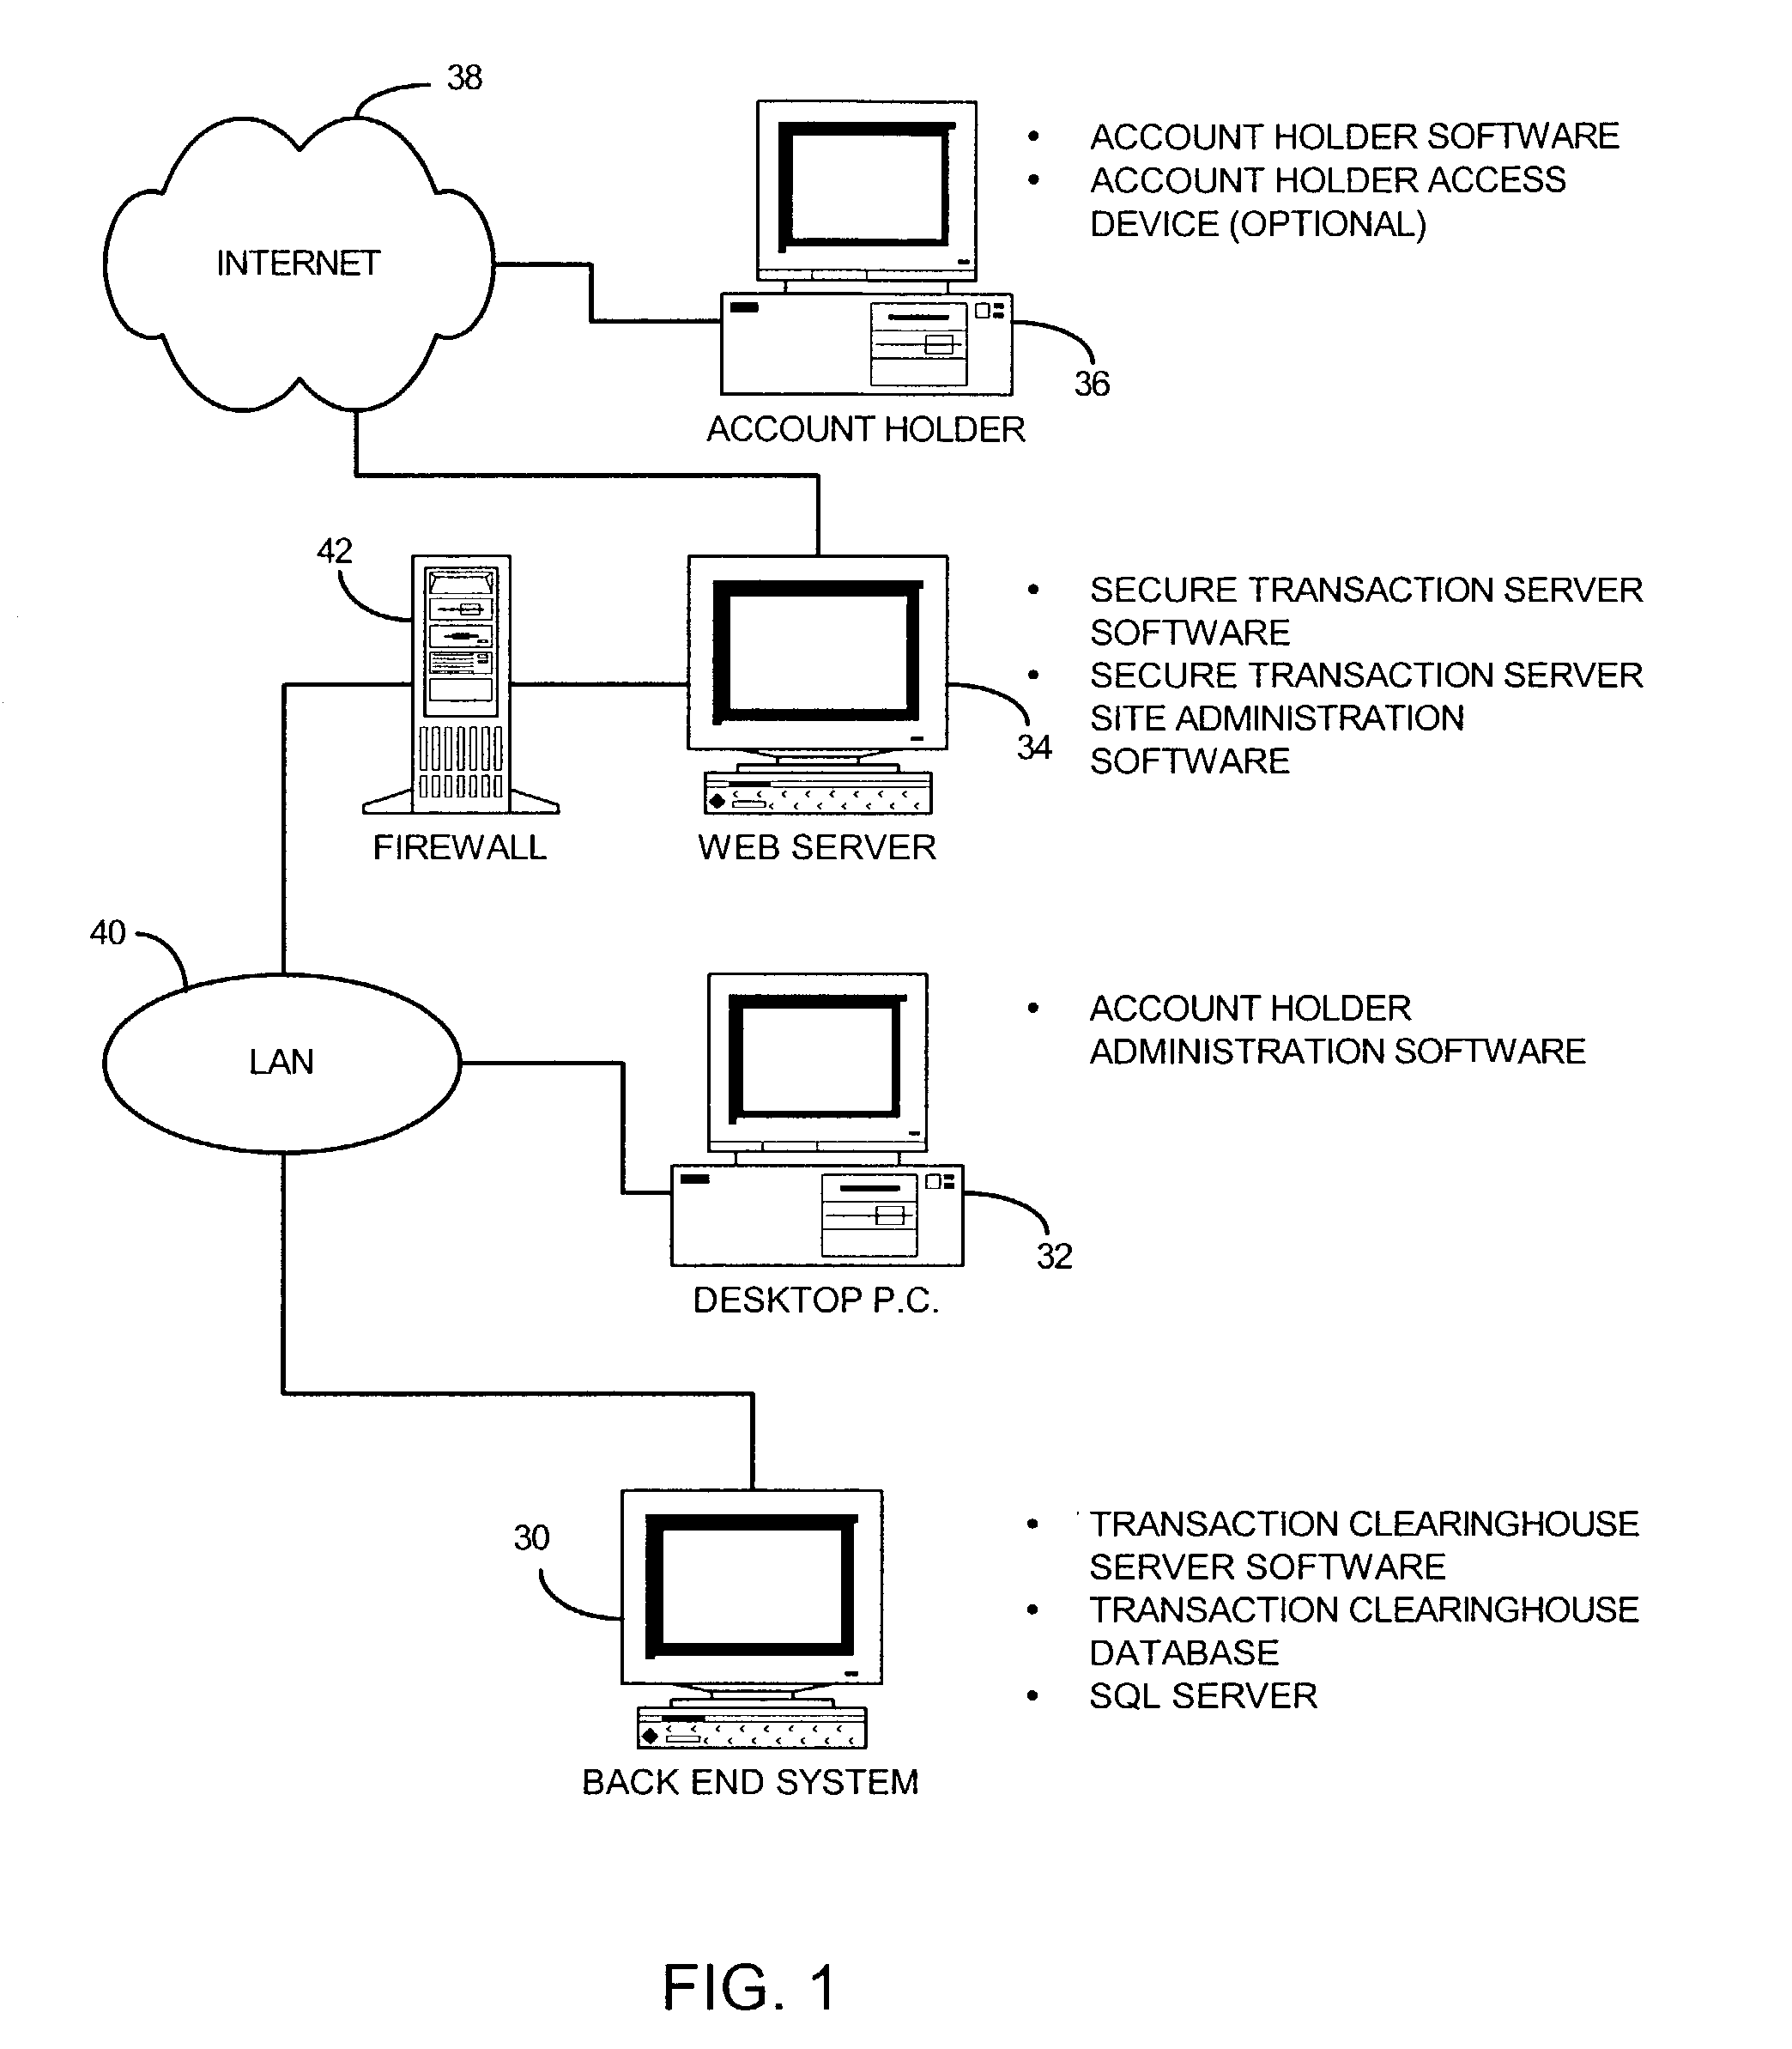 Method and system for controlling access, by an authentication server, to protected computer resources provided via an internet protocol network